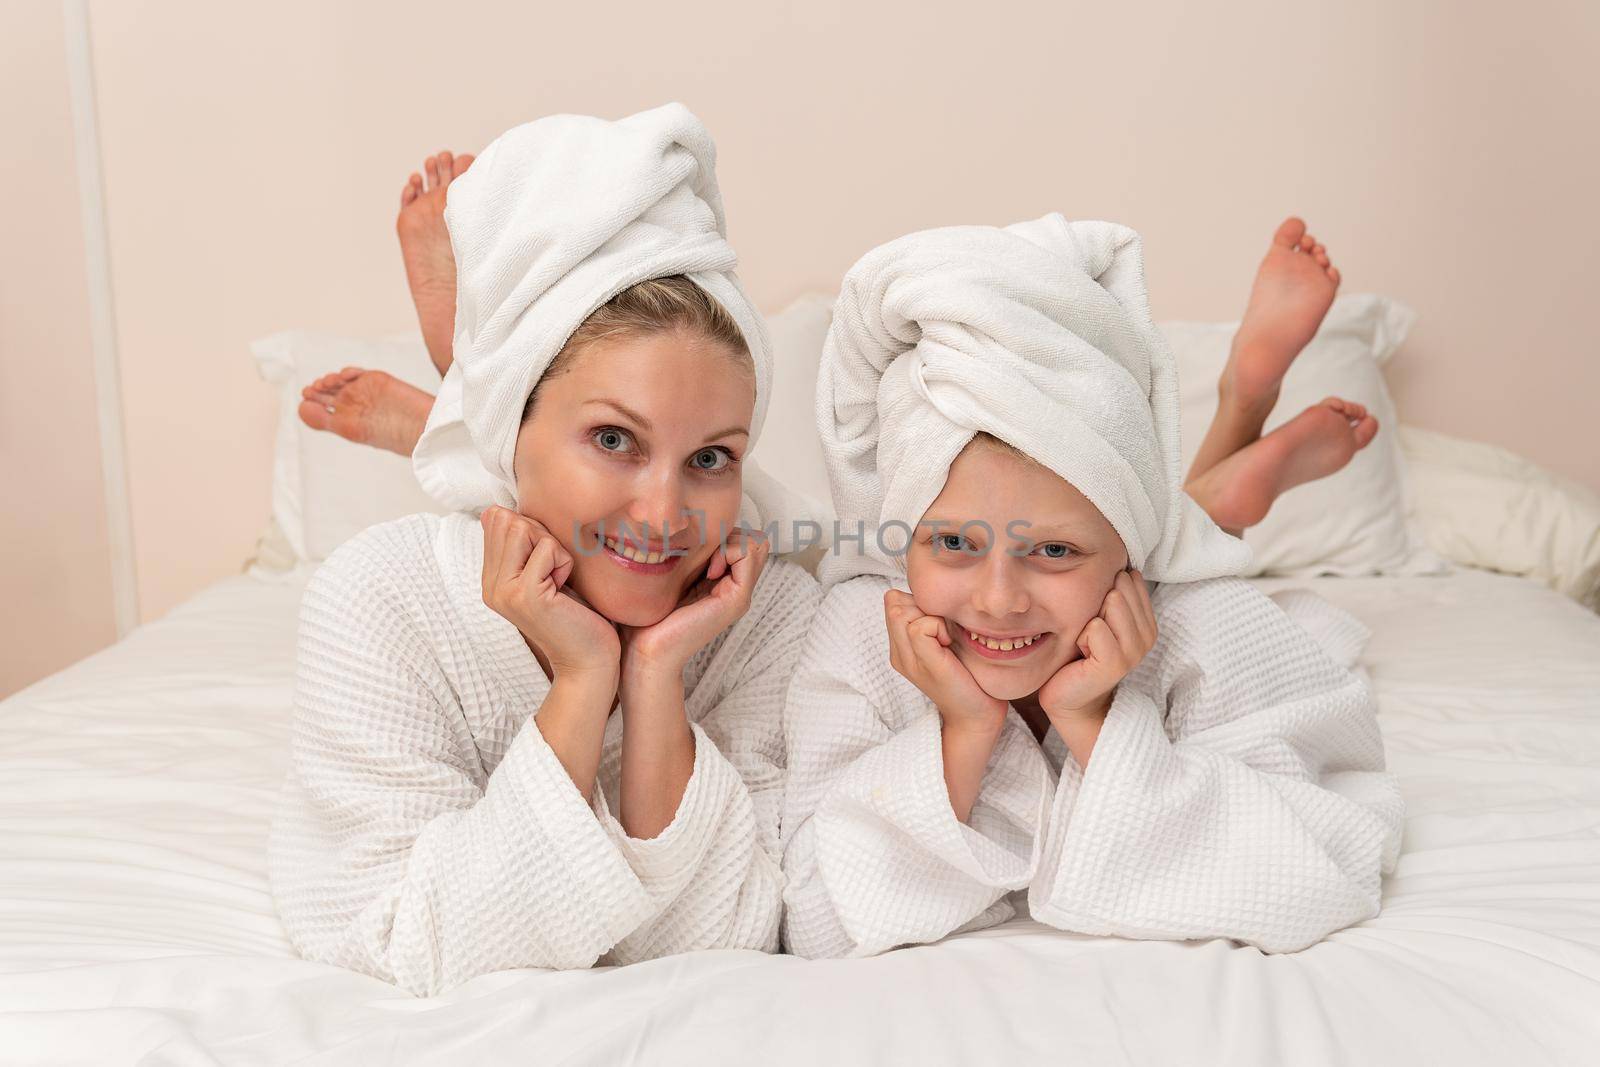 Daughter love mom smiling bath dries thinks elbows Creek bed, from white hygiene from pretty and skin beautiful, child baby. Hair funny comfort,